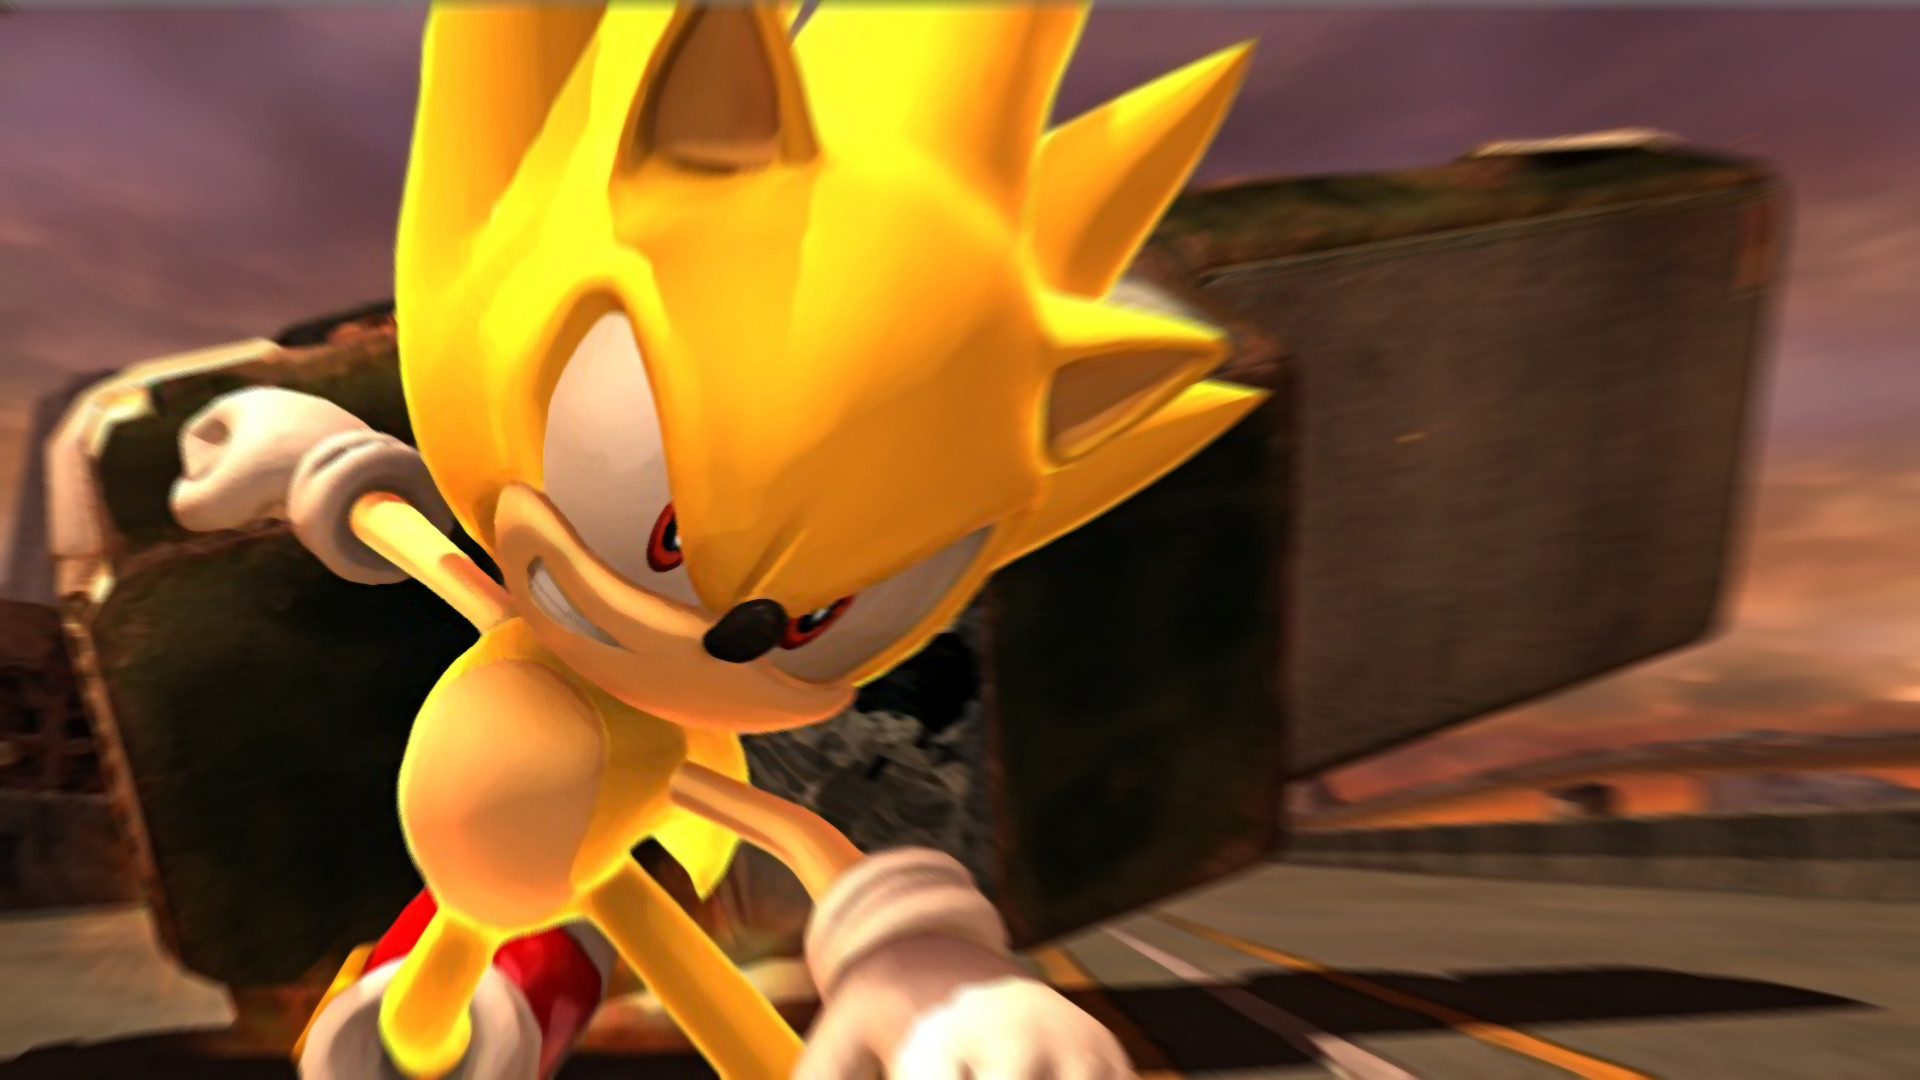 1920x1080 Super Sonic Generations by ZuneTH Super Sonic Generations by ZuneTH